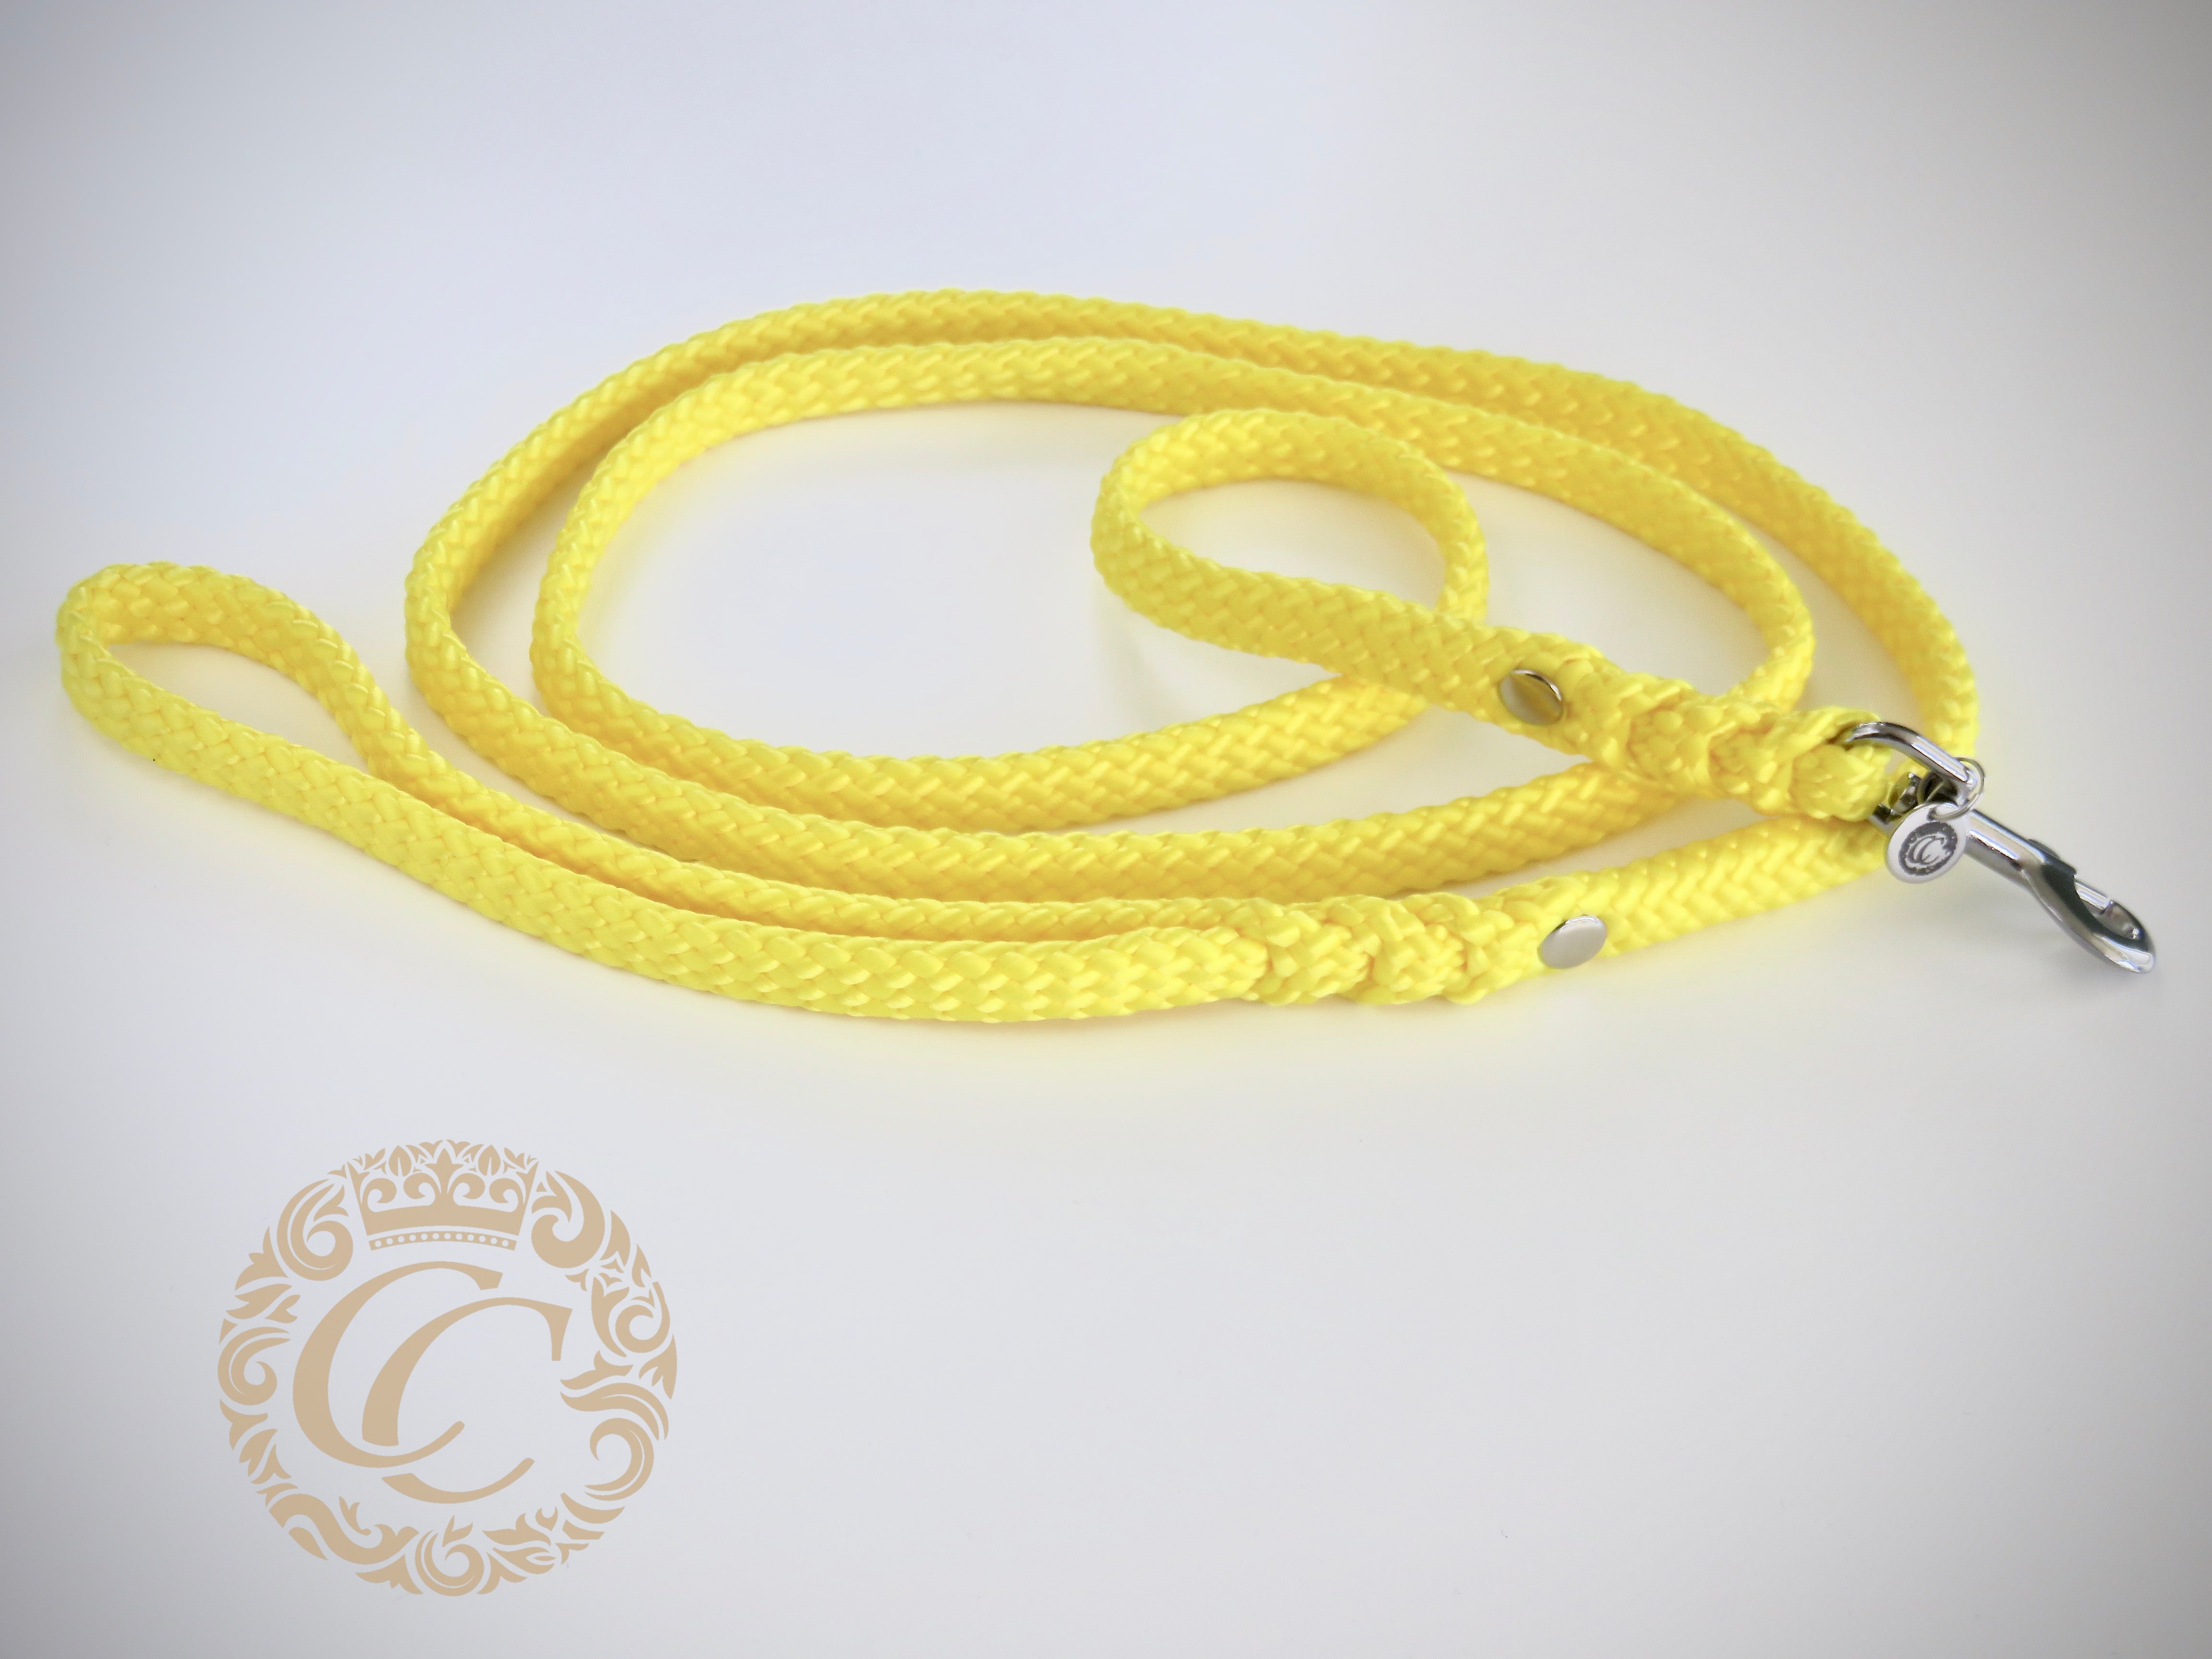 Dog leash for small & medium dogs Yellow | Paracord leashes | CollarCrafts | Dog leash paracord | washable leashes | leibanden | honden leibanden | Collars and leashes | CollarCrafts | dogleash | dog lead | hondenleiband | honden leibandband | small leashes | ppm leashes | custom made leashes